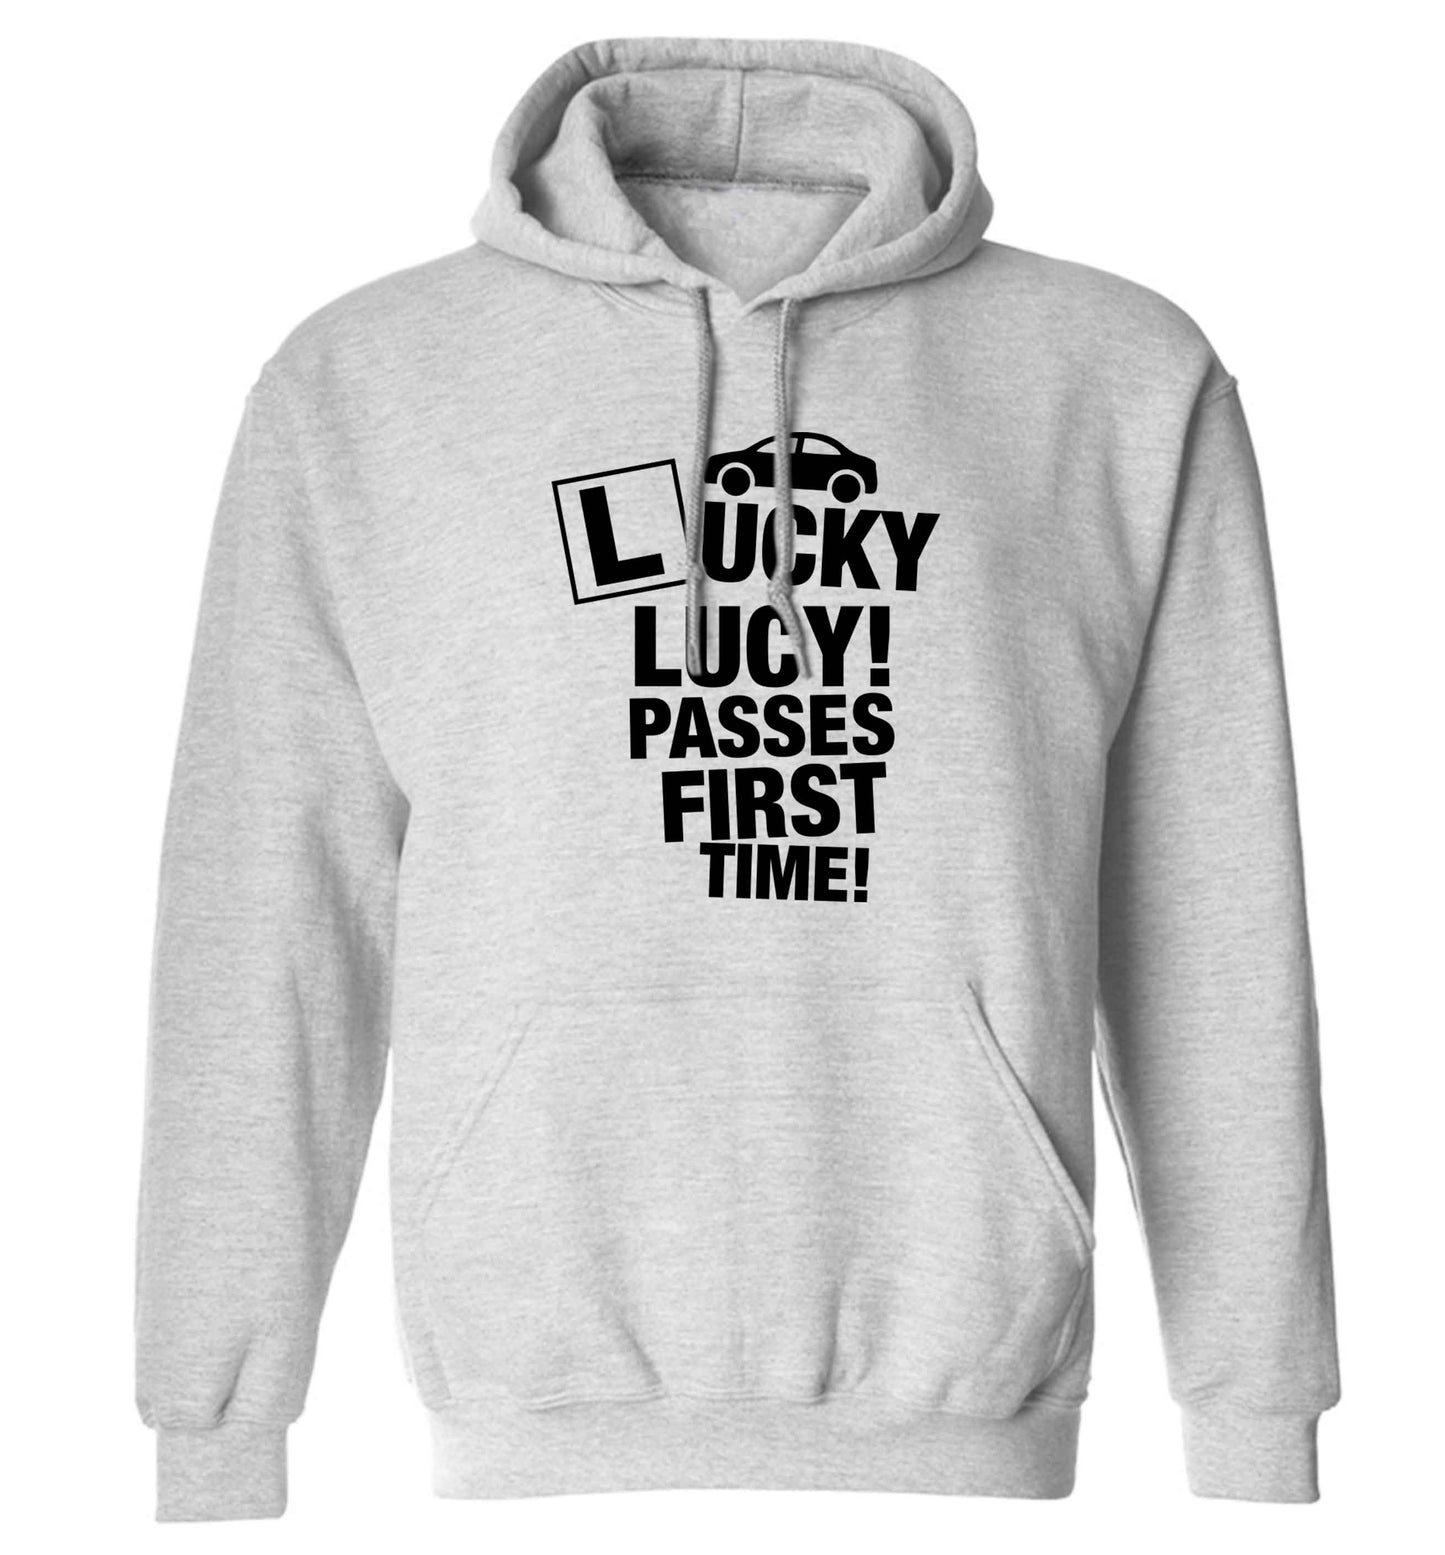 Personalised Lucky passes first time adults unisex grey hoodie 2XL